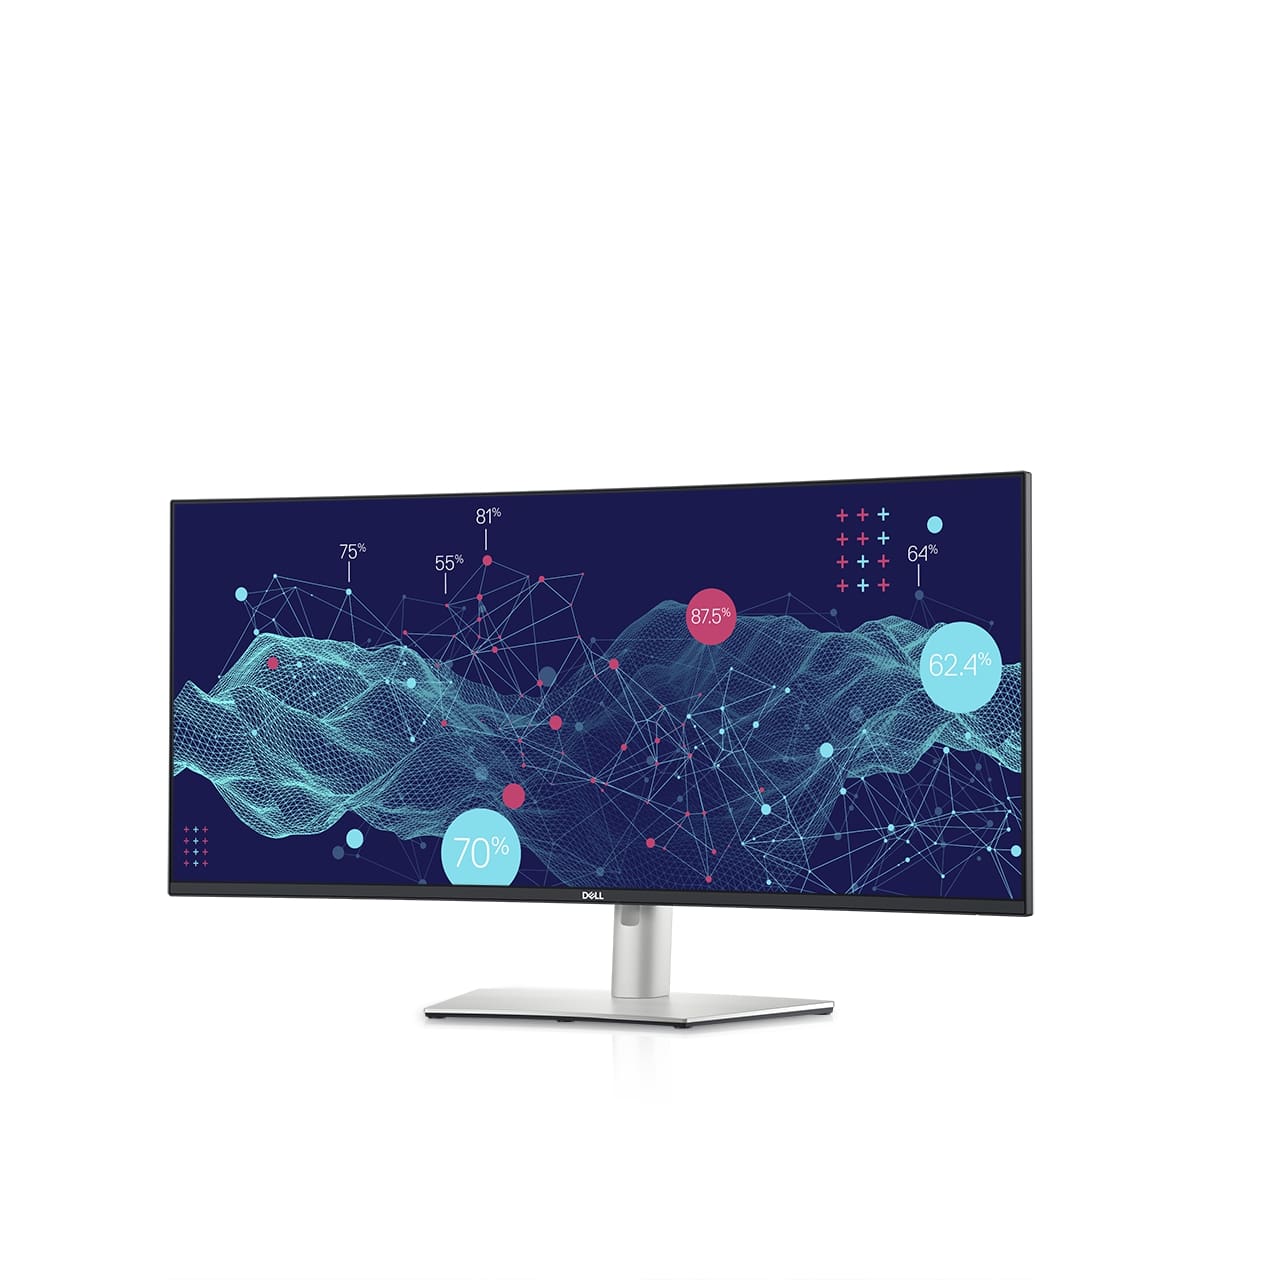 dell refreshes ultrasharp monitors ces 2021 38 curved usb c hub monitor left facing